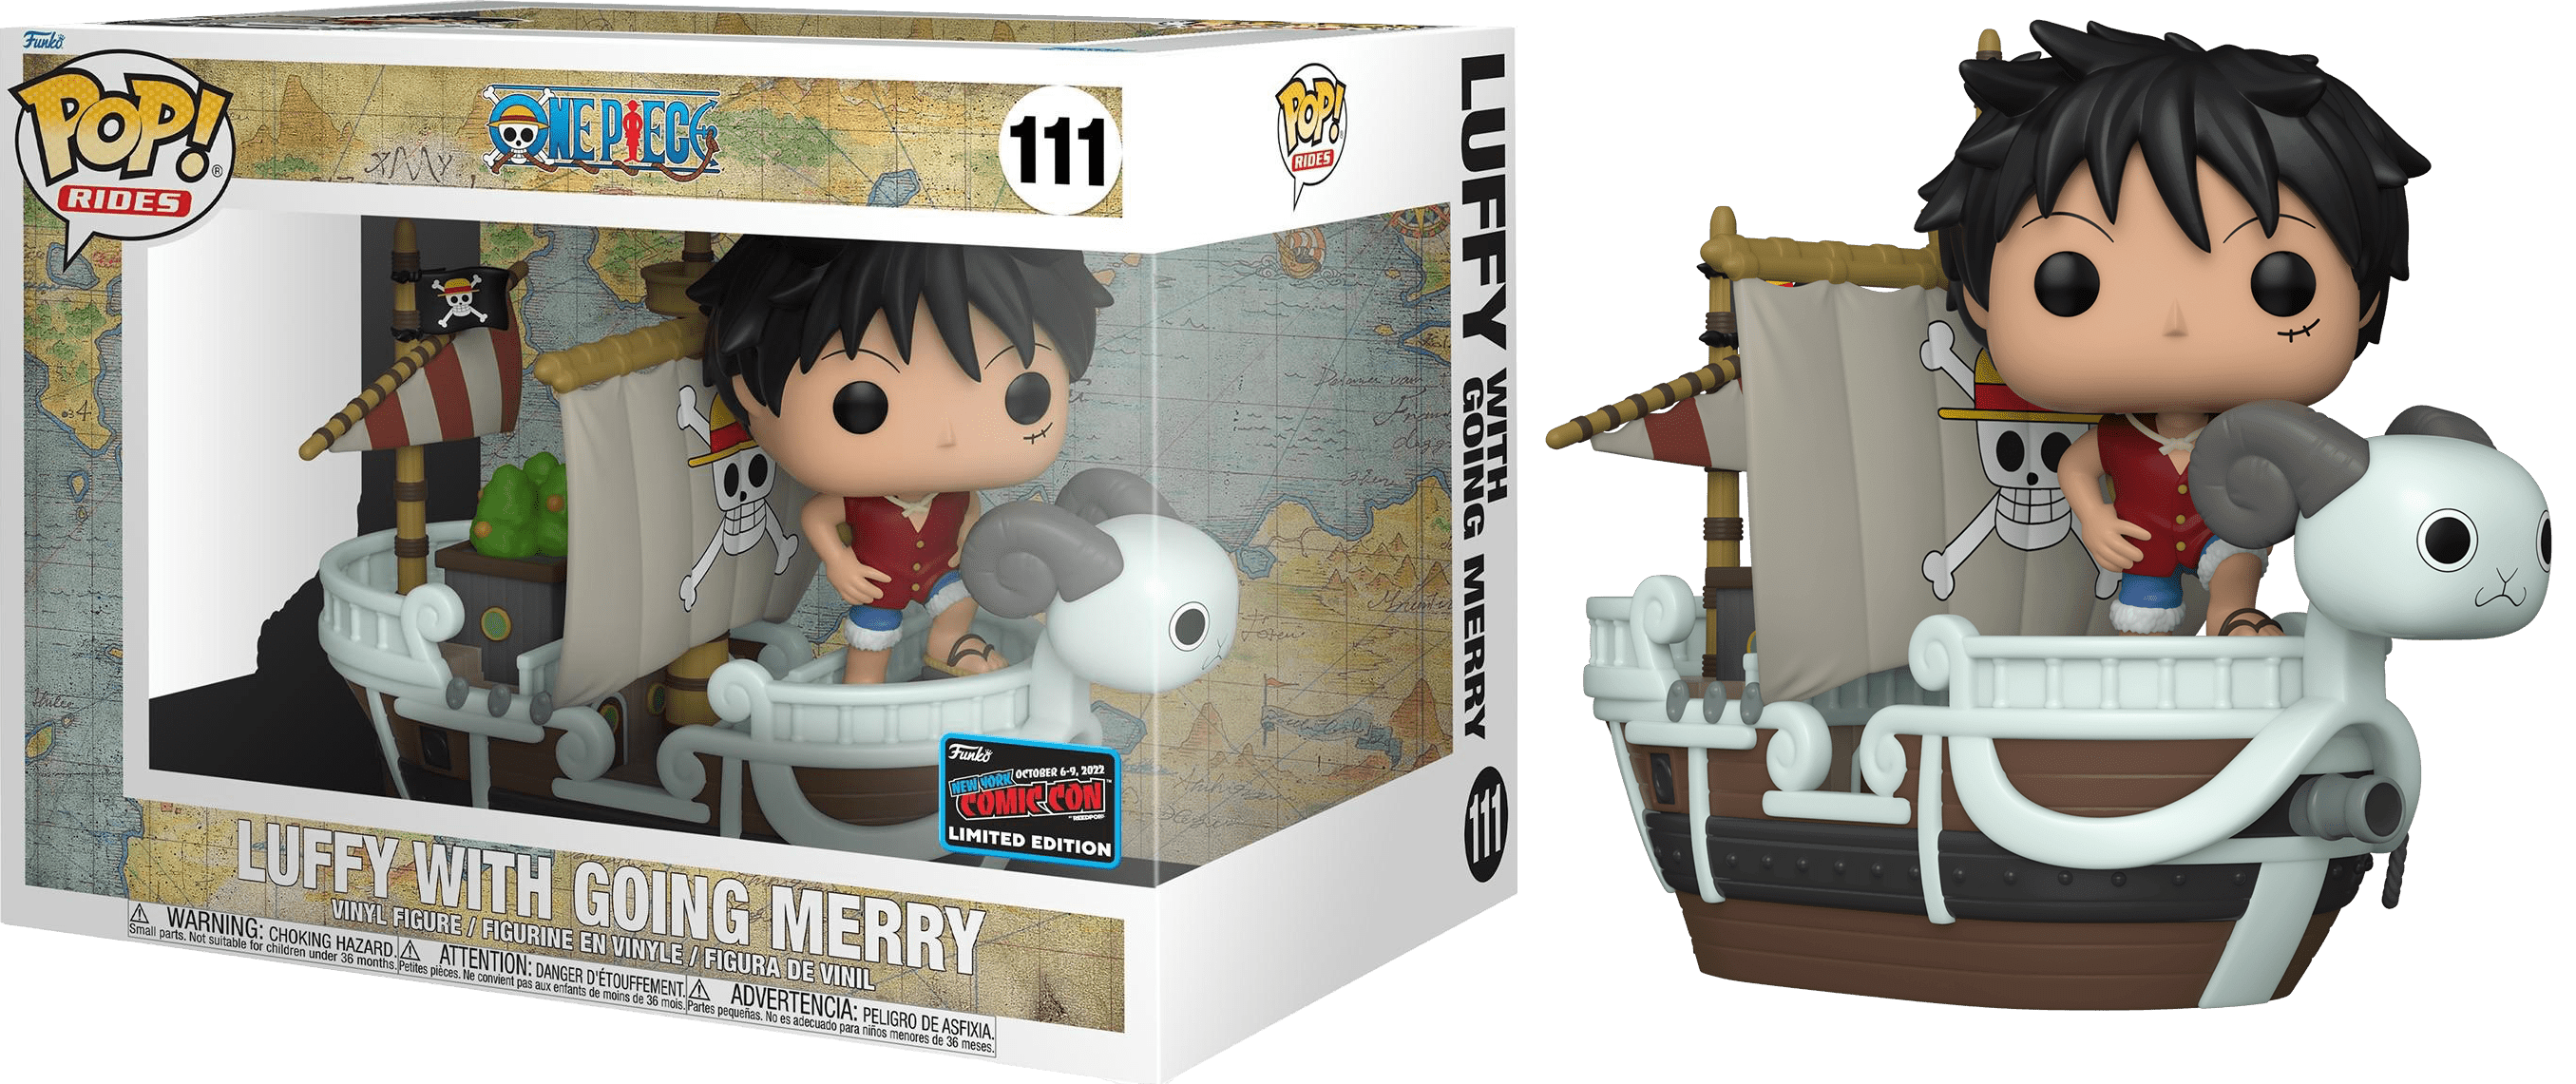 Funko POP! Rides One Piece Luffy with Going Merry #111 Exclusive 